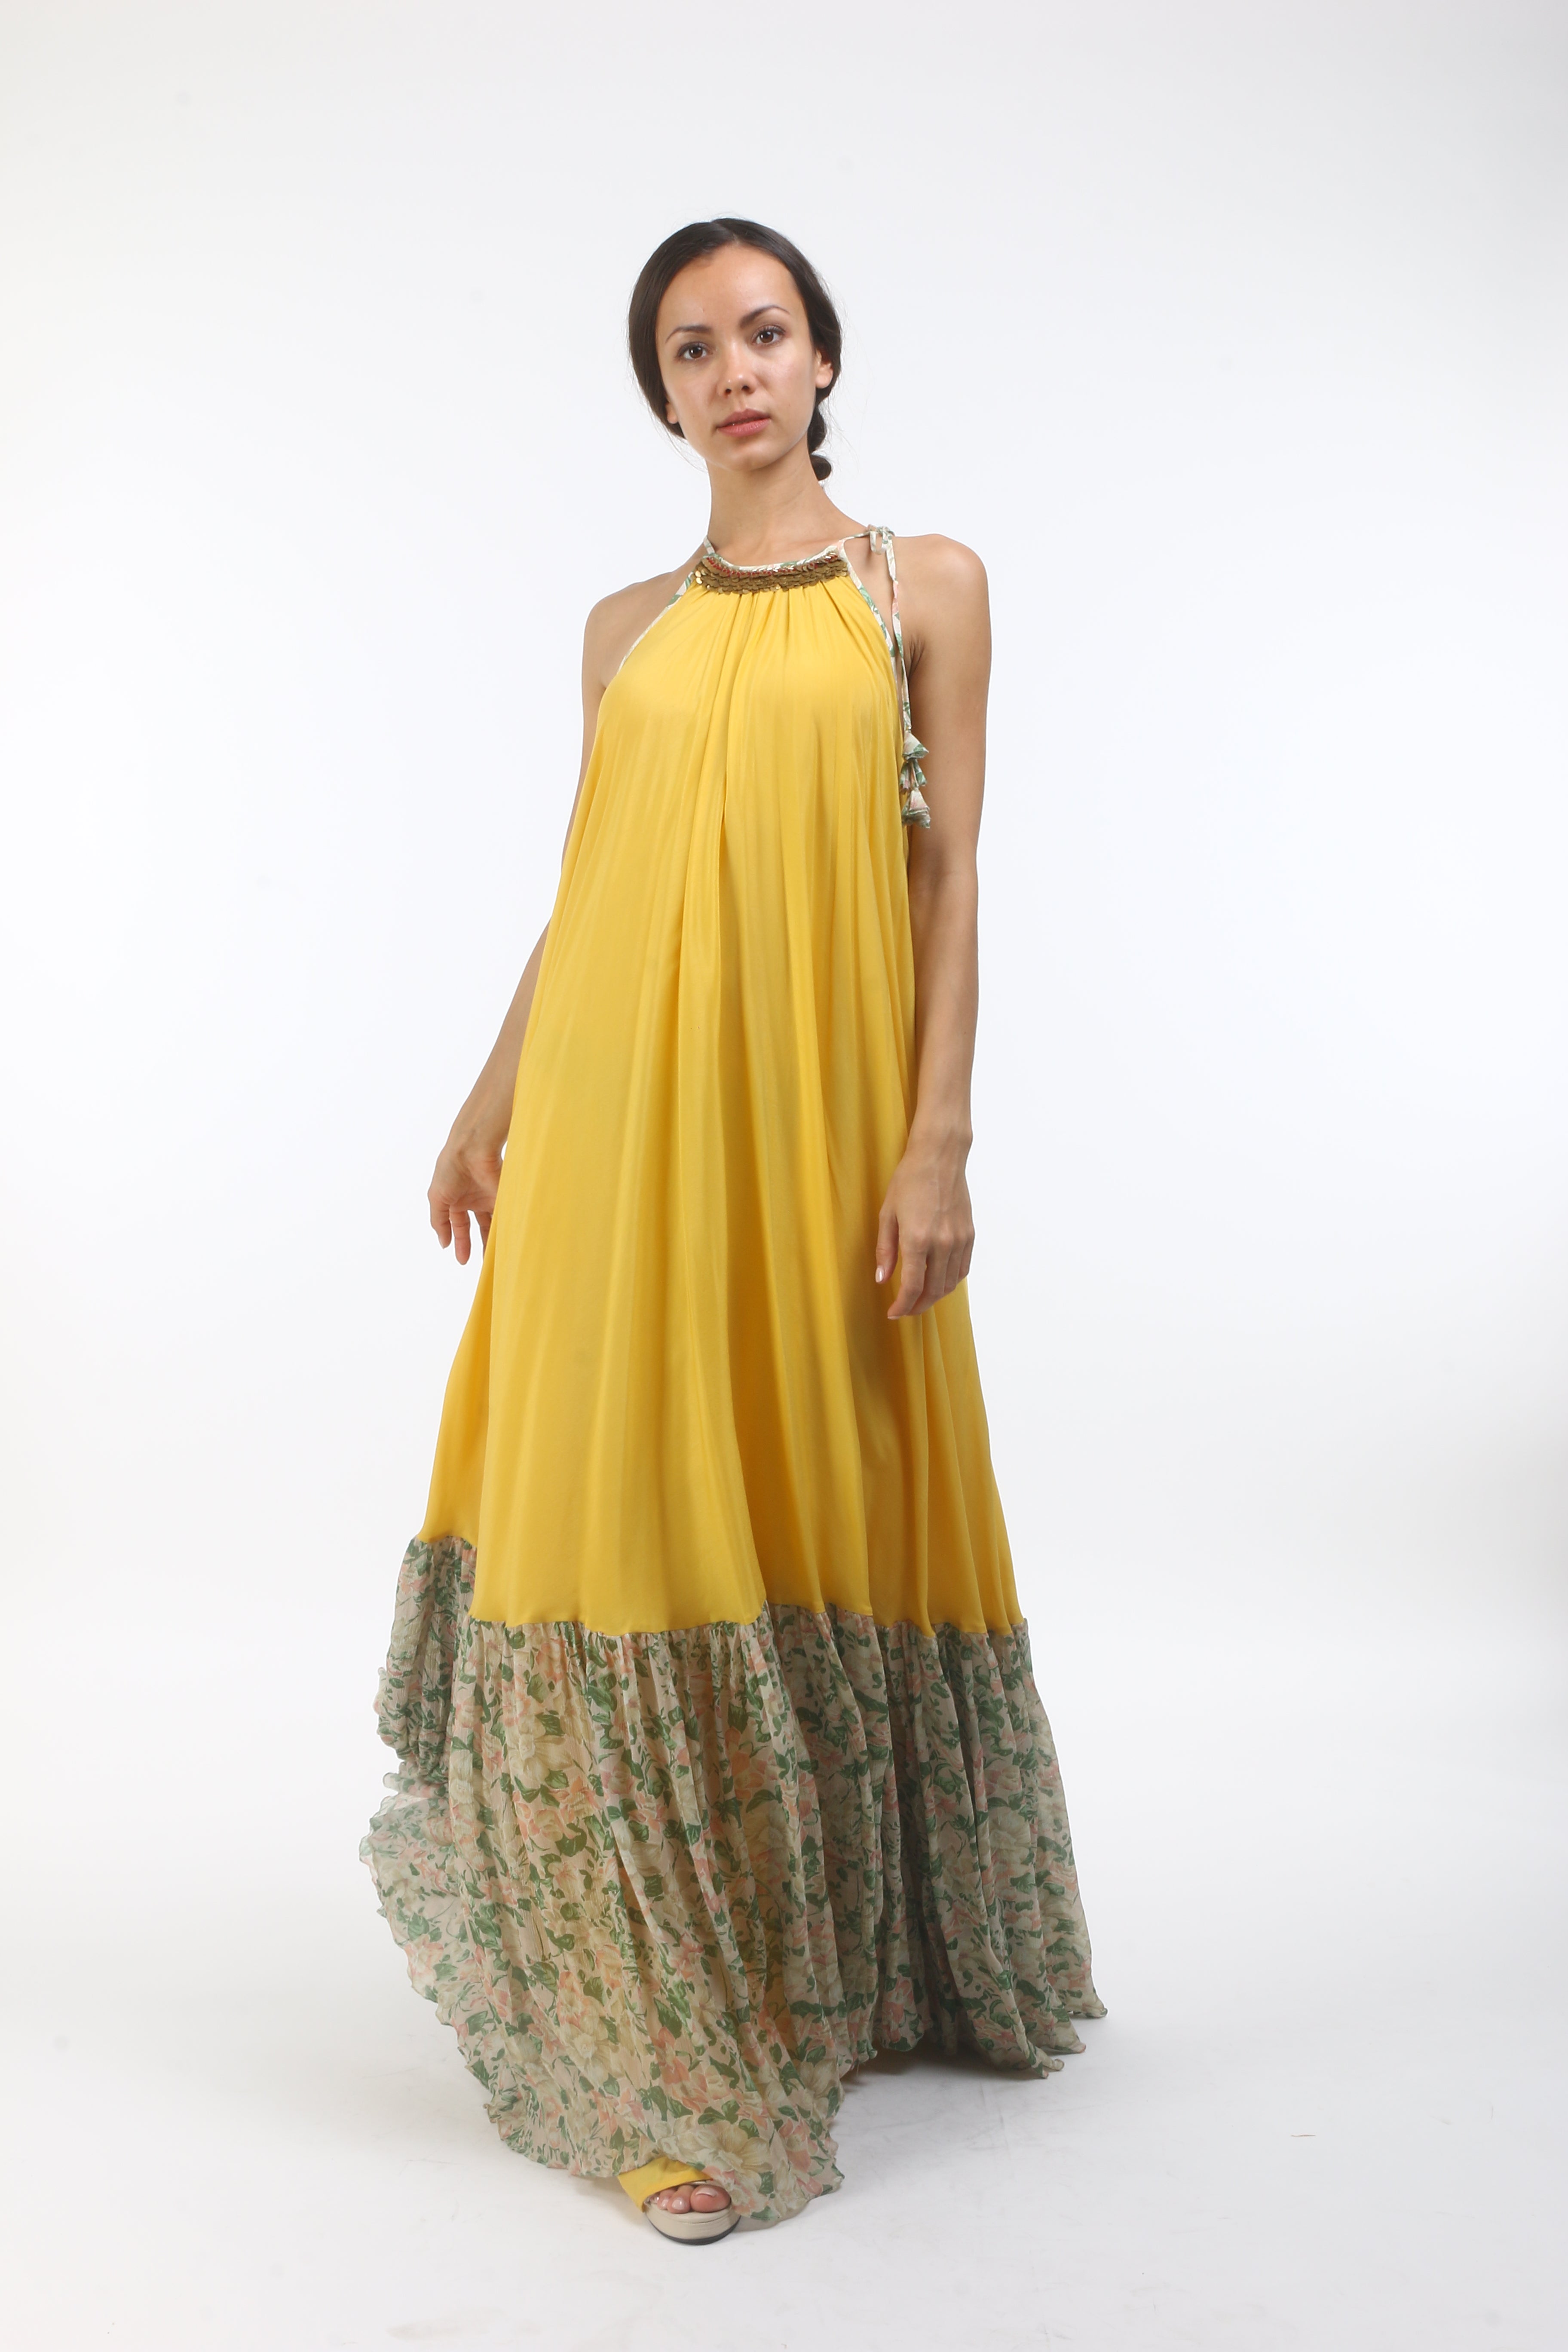 Bloom pitambari yellow halter dress in crepe, with bibi jaal printed chiffon gathers and layered coin embroidered neckline.